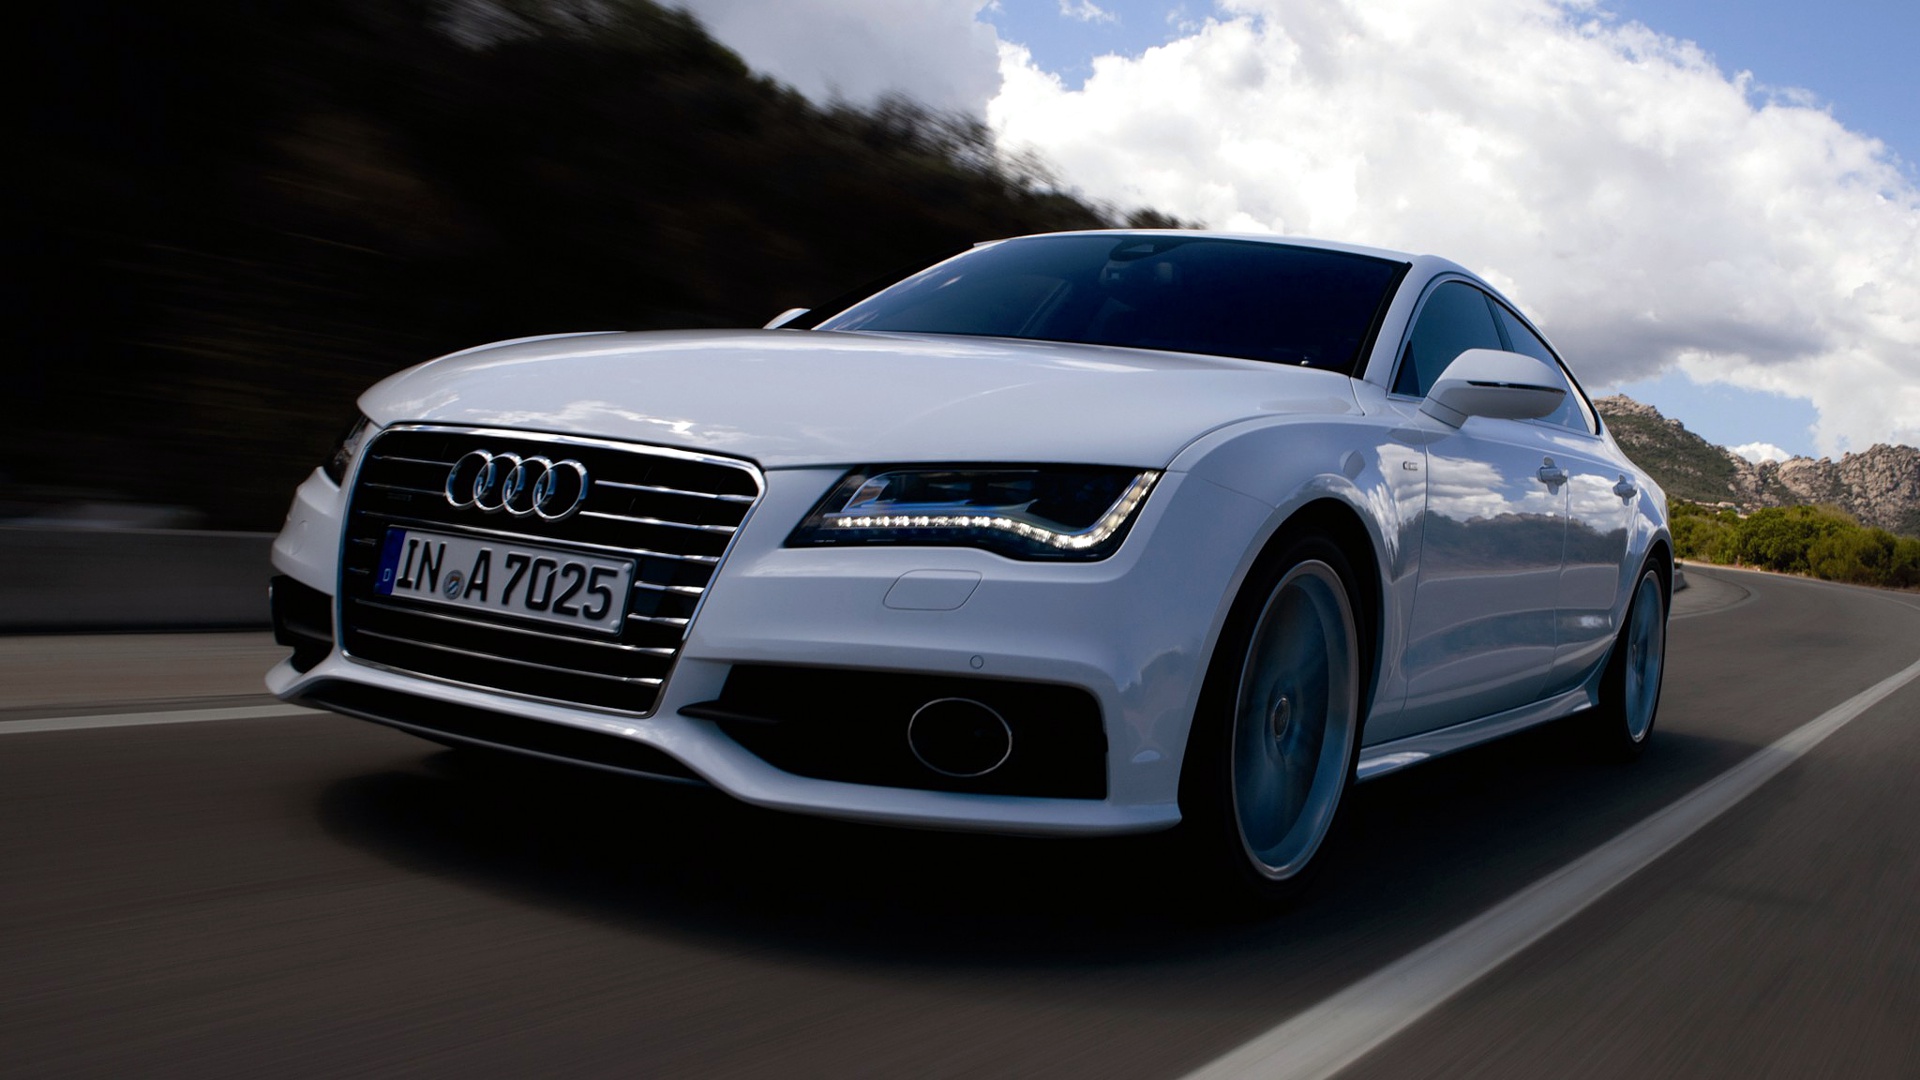 Audi HD Wallpaper Background All Cars Pictures